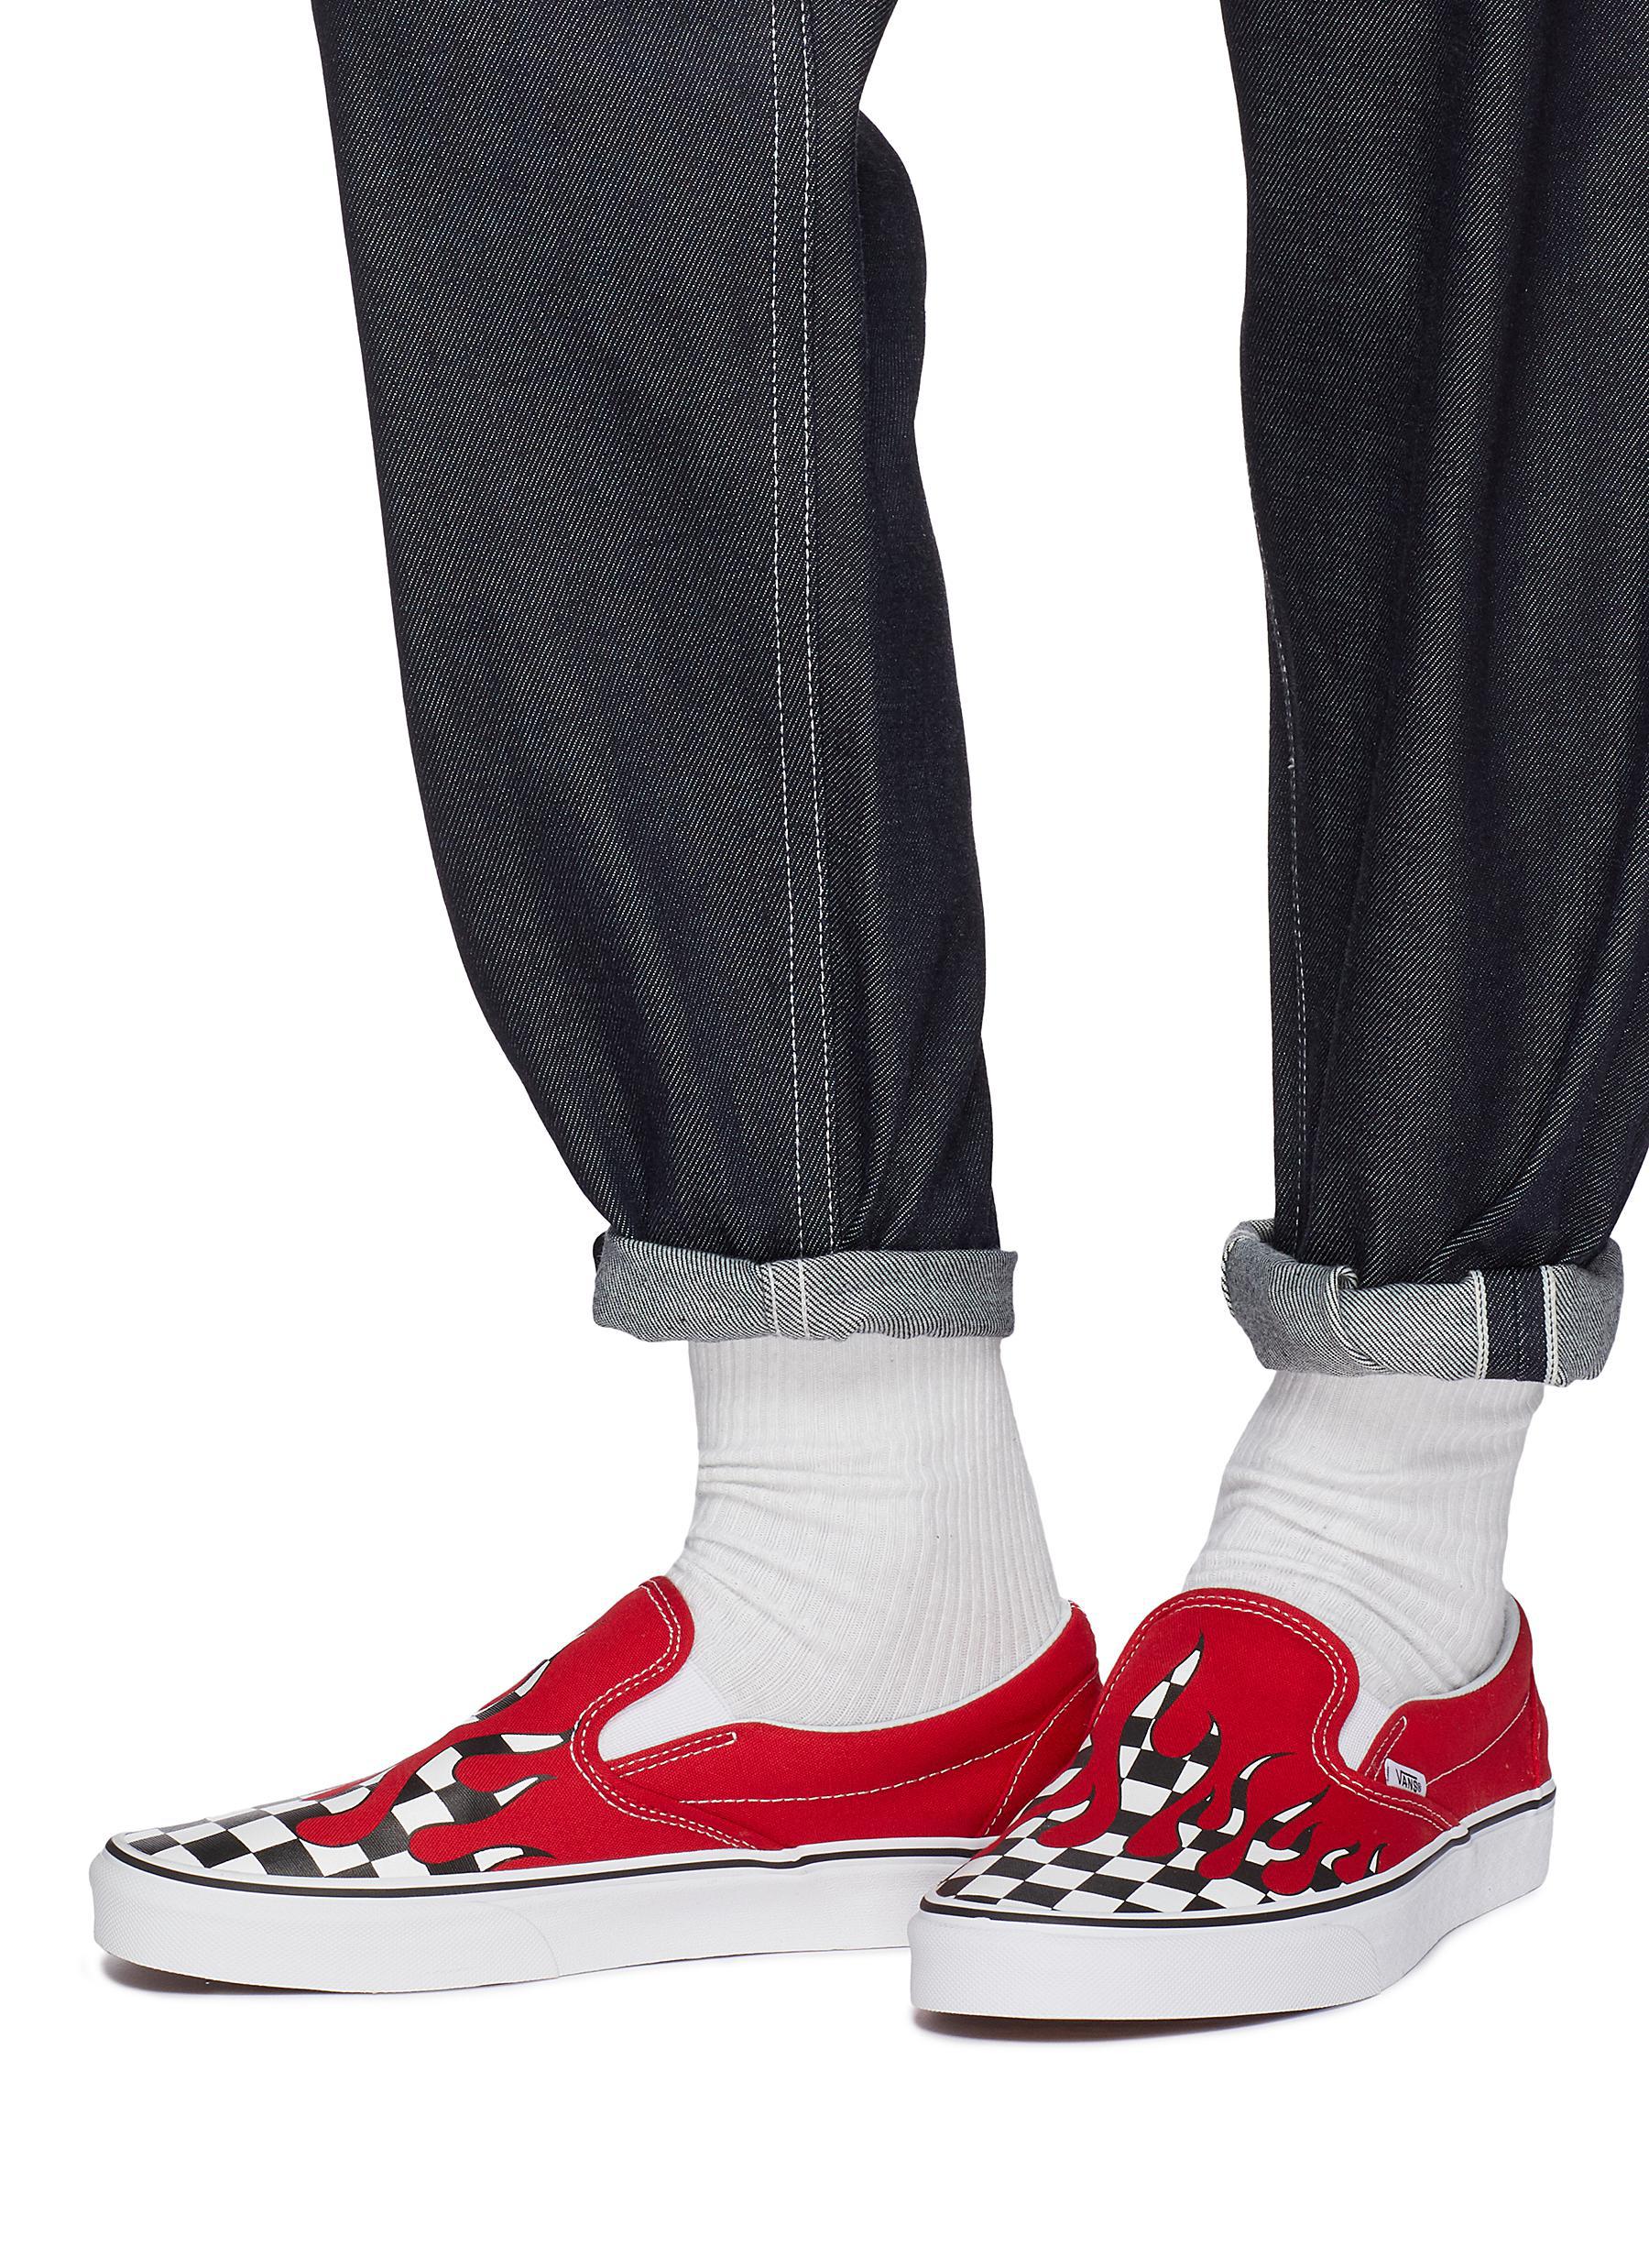 checkered flame slip ons